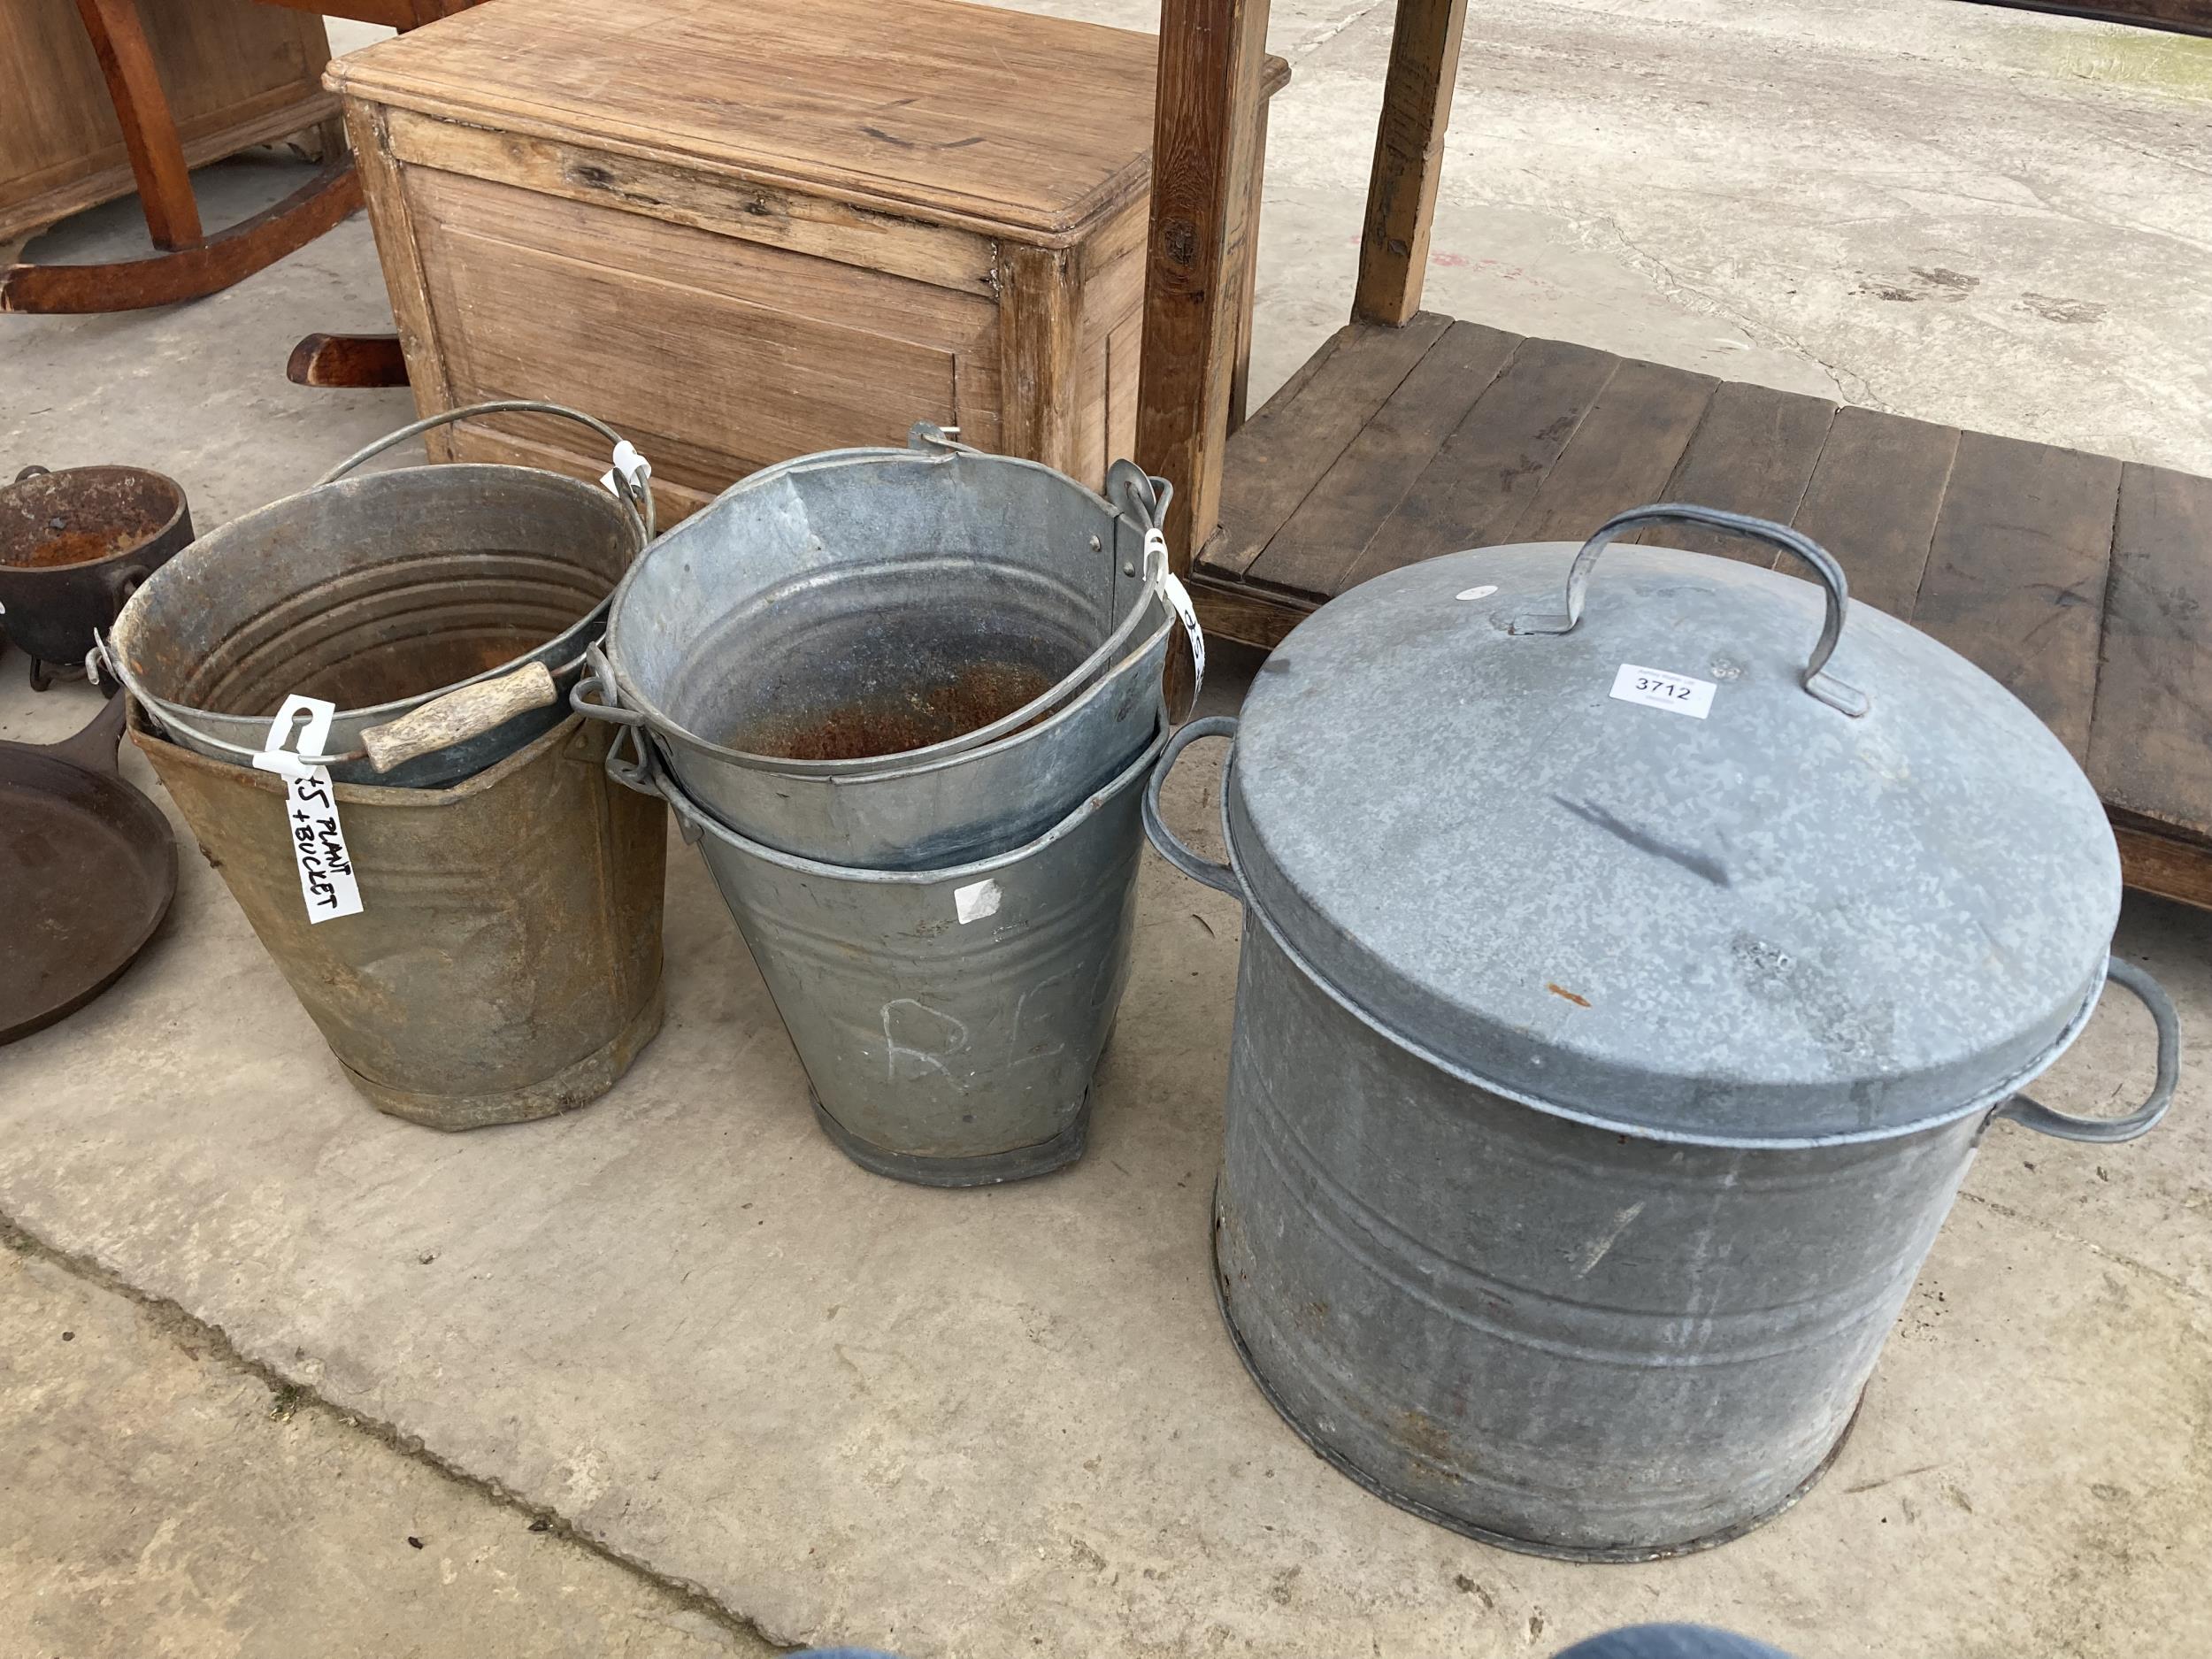 A GROUP OF VINTAGE GALVANISED BUCKETS TO INCLUDE A LIDDED EXAMPLE